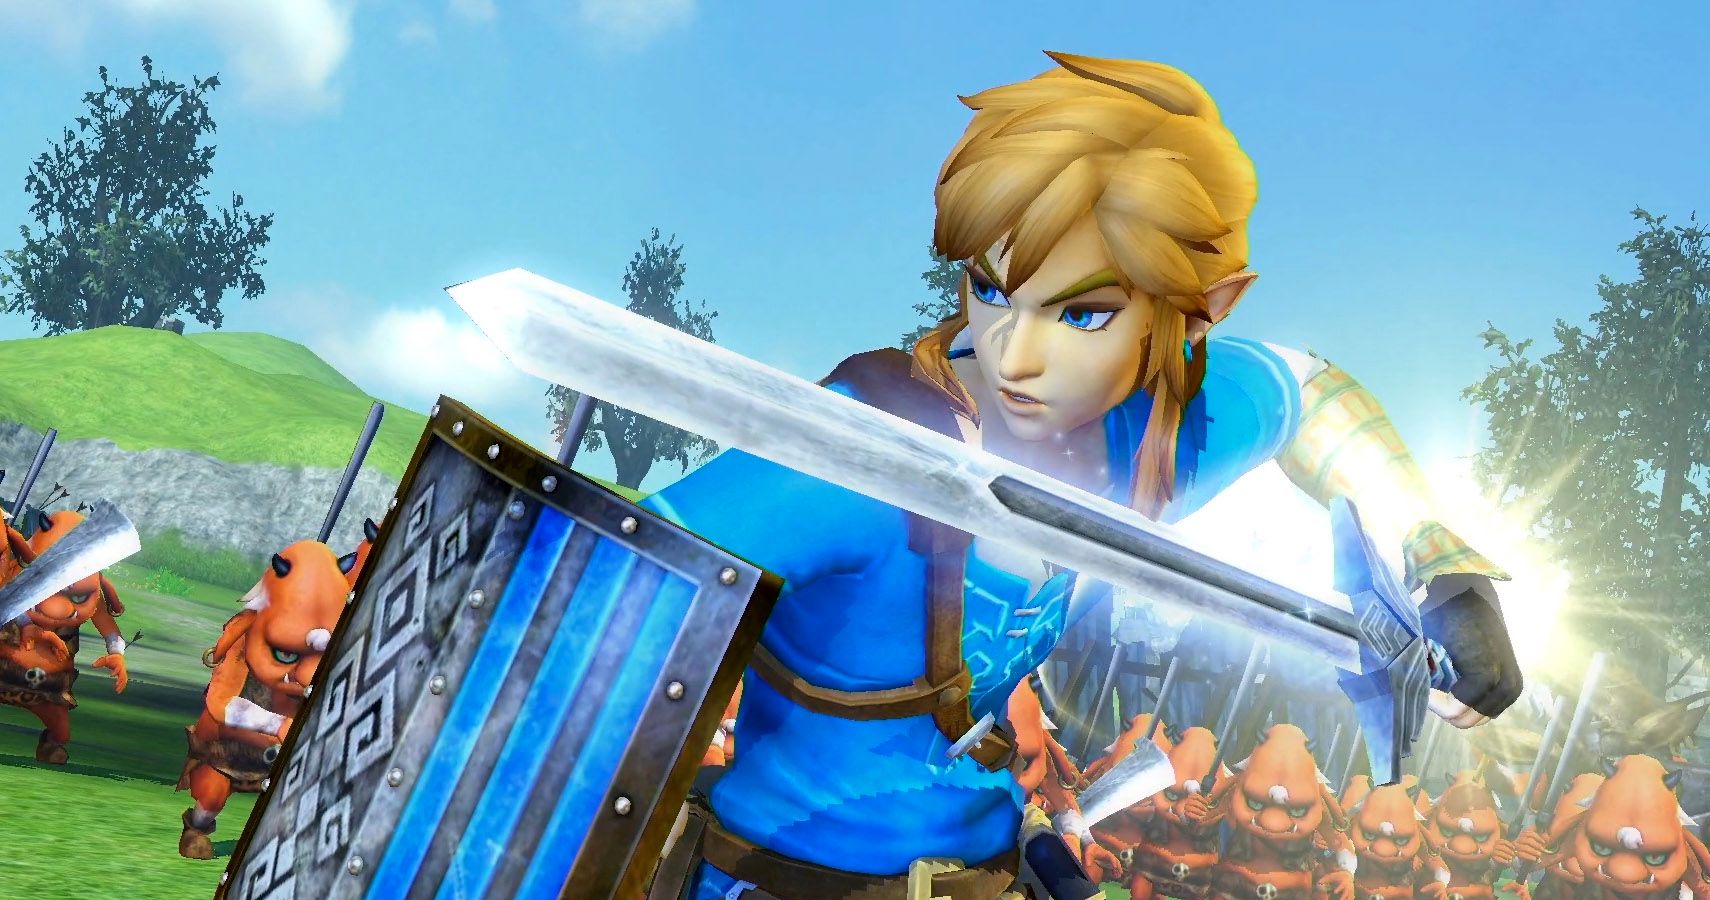 The Legend Of Zelda Games, Ranked From Worst To Best